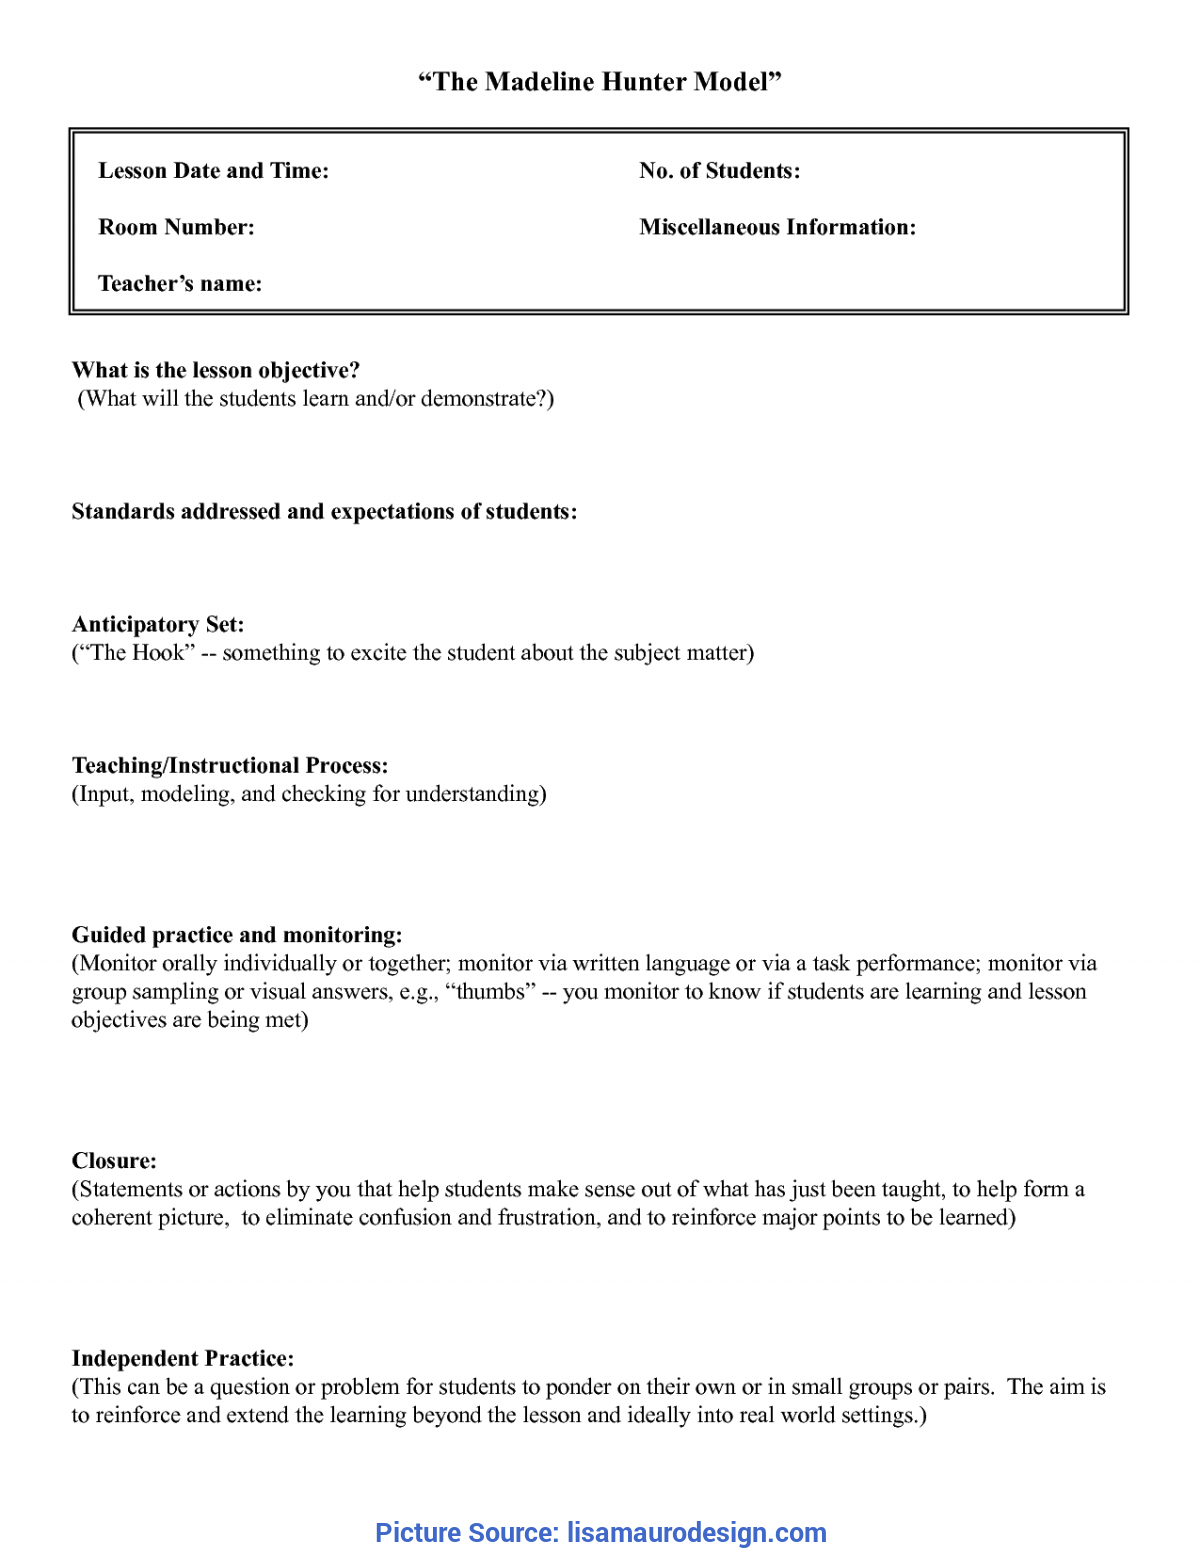 Best Lesson Plan Template Anticipatory Set Madeline Hunter With Regard To Madeline Hunter Lesson Plan Template Blank